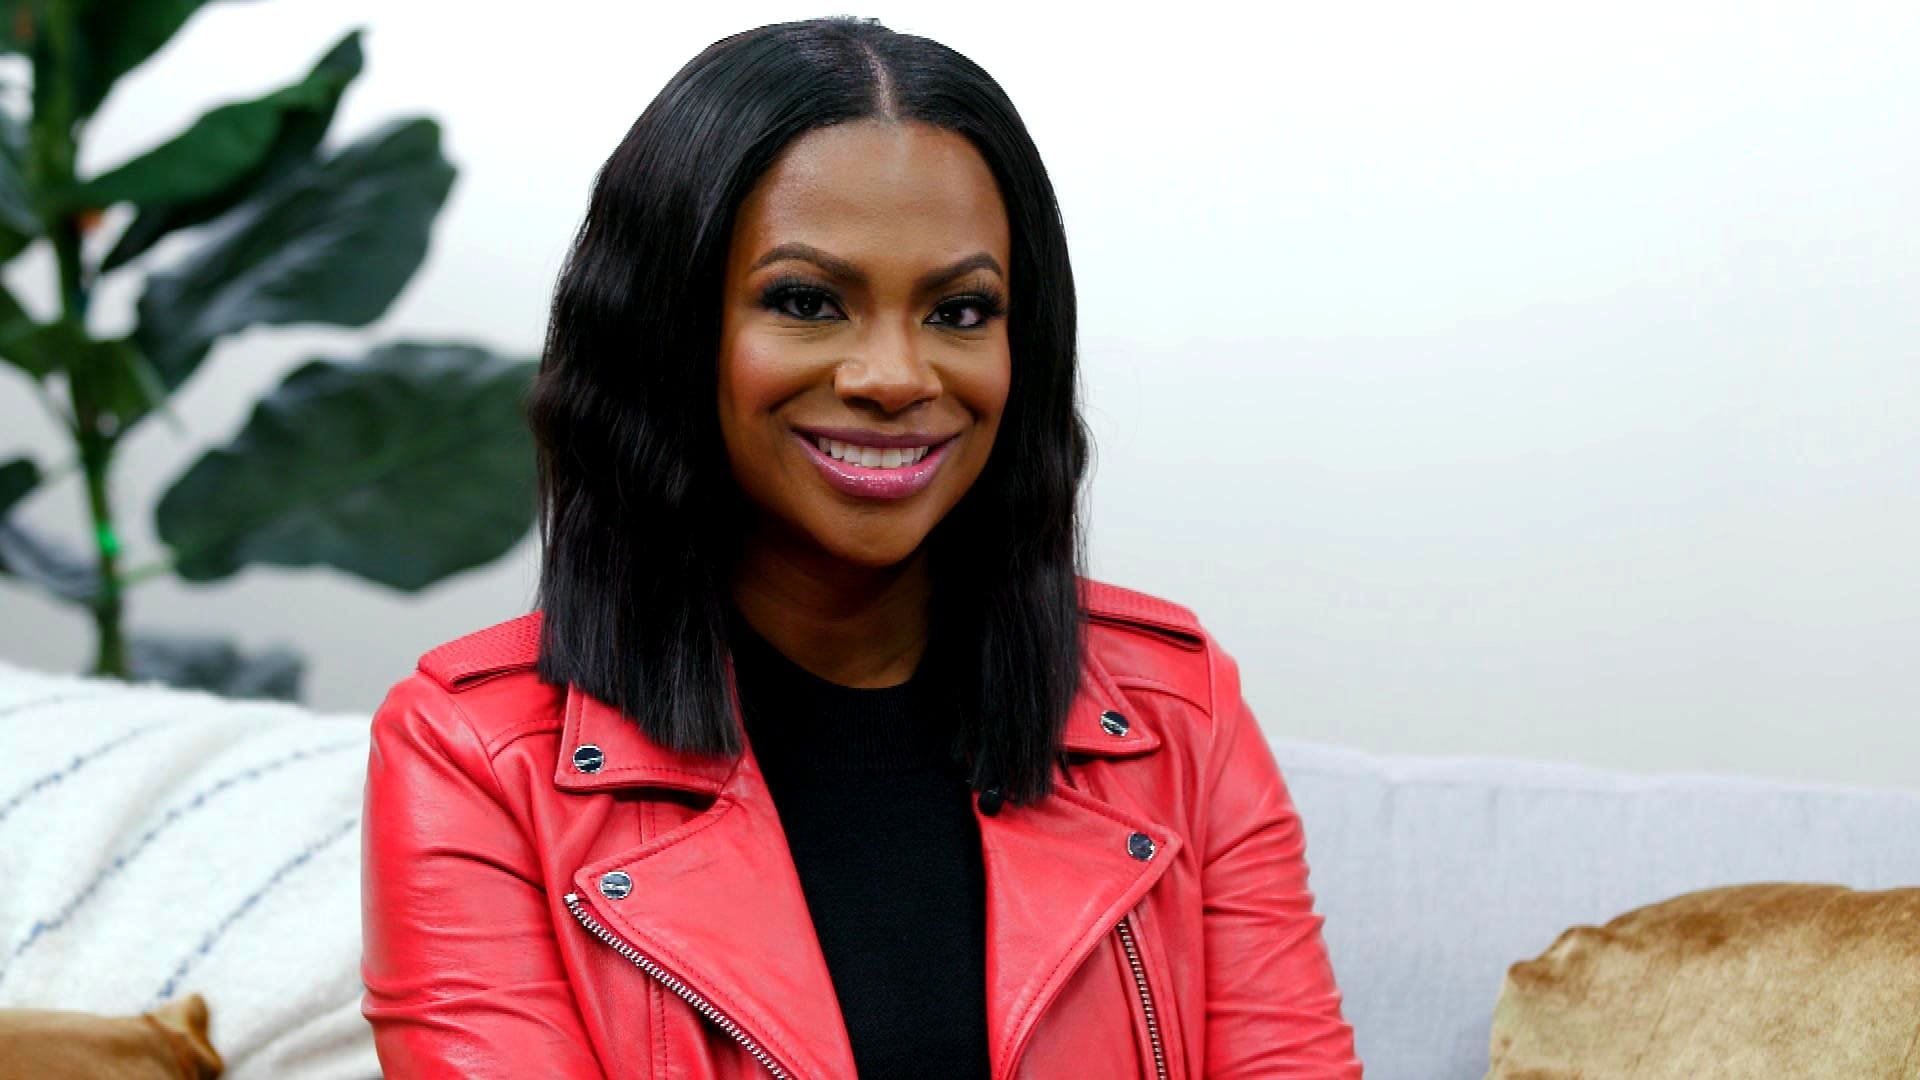 Kandi Burruss Wishes Happy Birthday To A Special Person - See Her Message